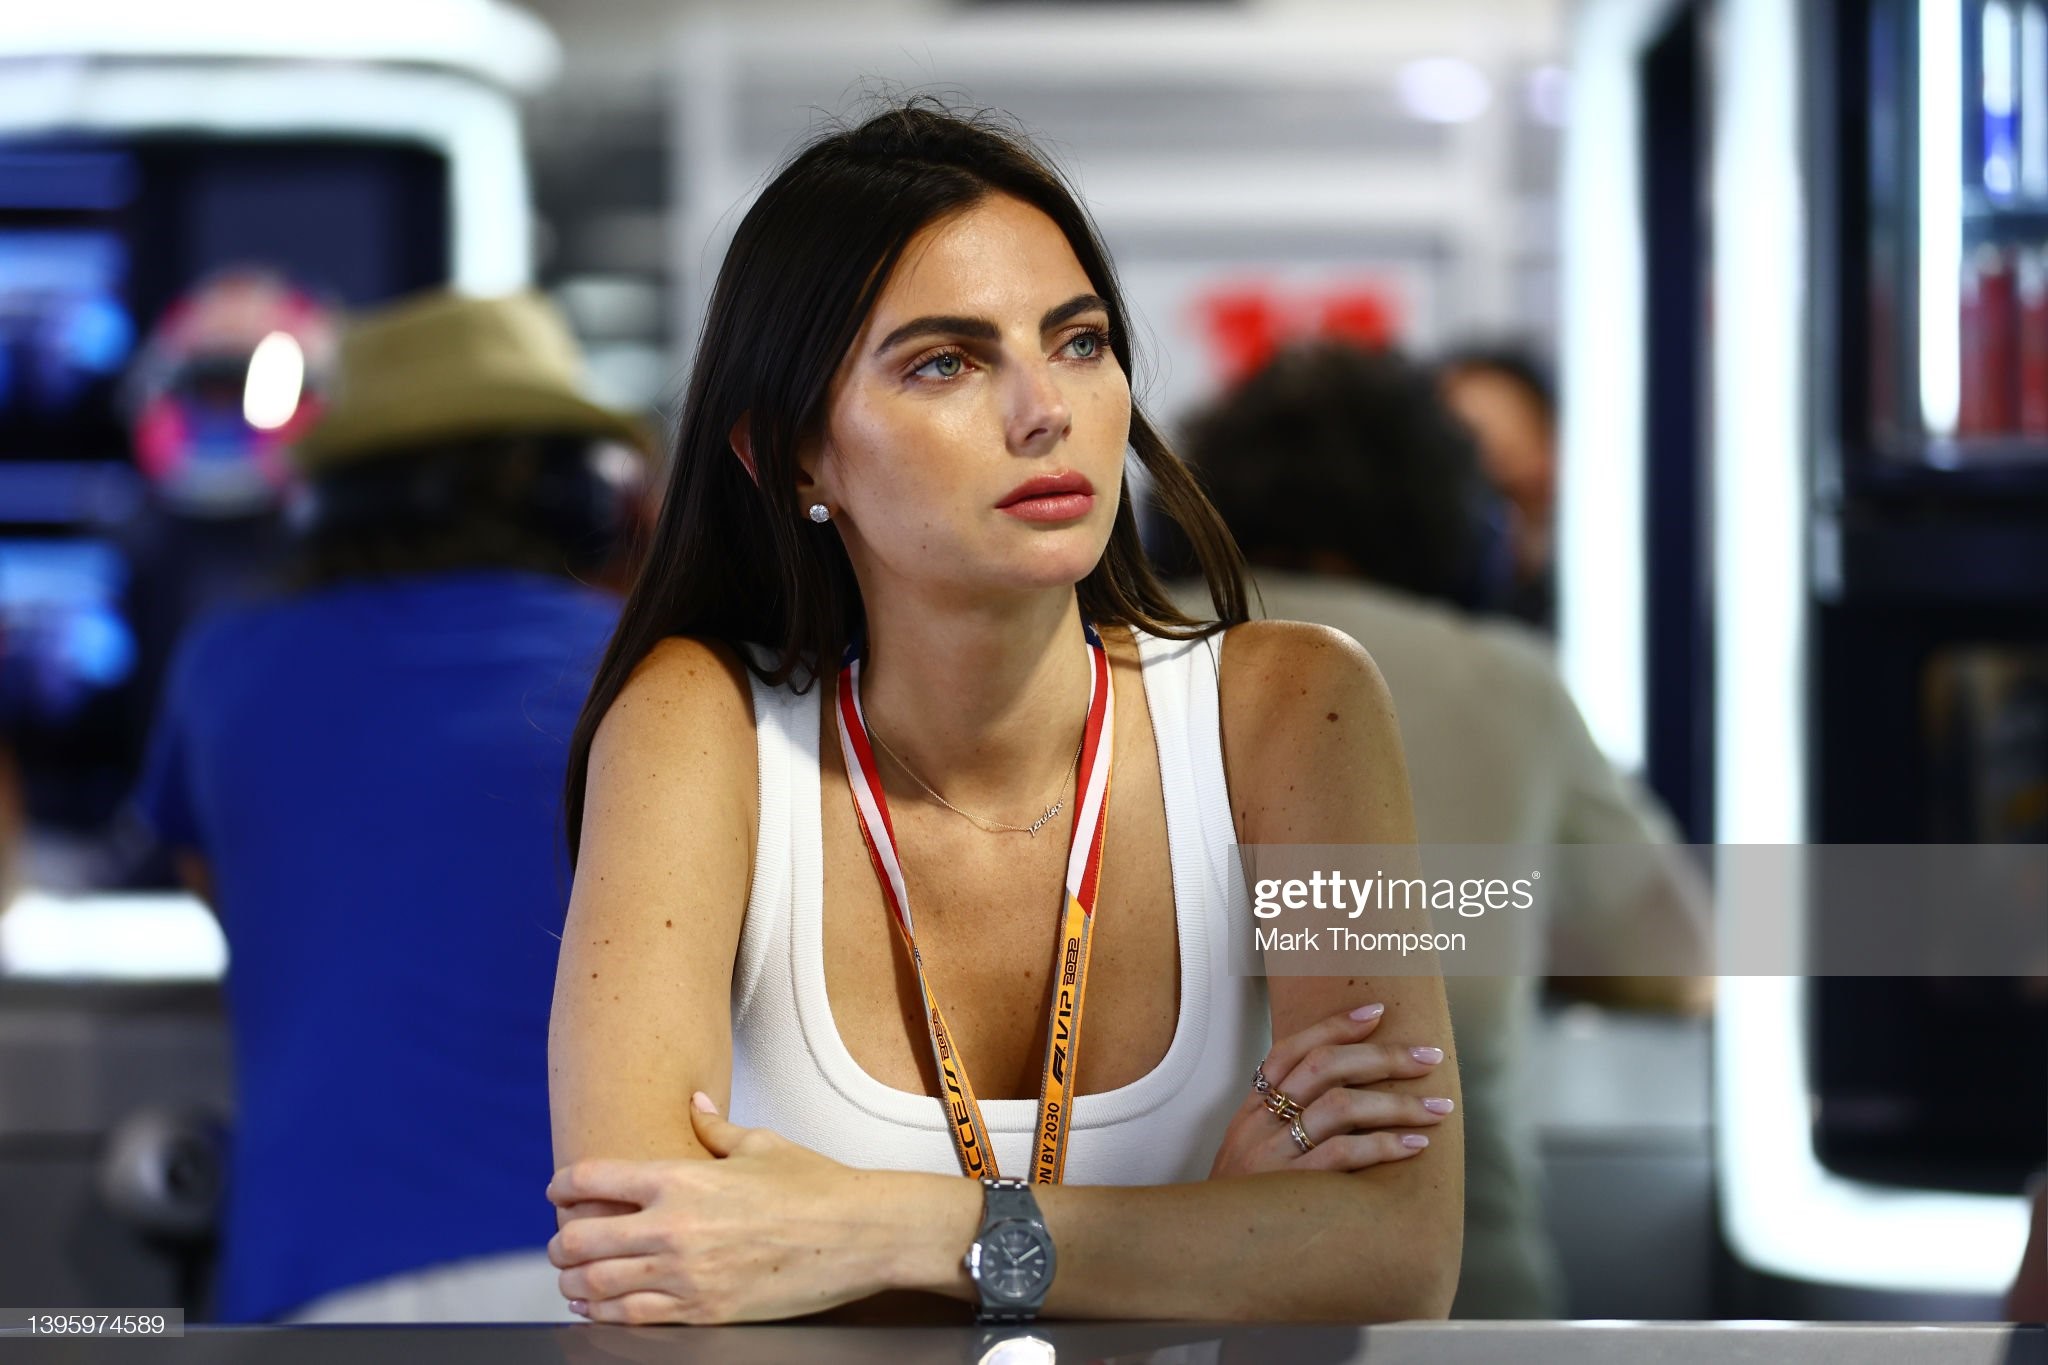   Kelly Piquet, Max Verstappen’s girlfriend, looks on from the Red Bull Racing garage during qualifying ahead of the F1 Grand Prix of Miami at the Miami International Autodrome on May 07, 2022 in Miami, Florida. 